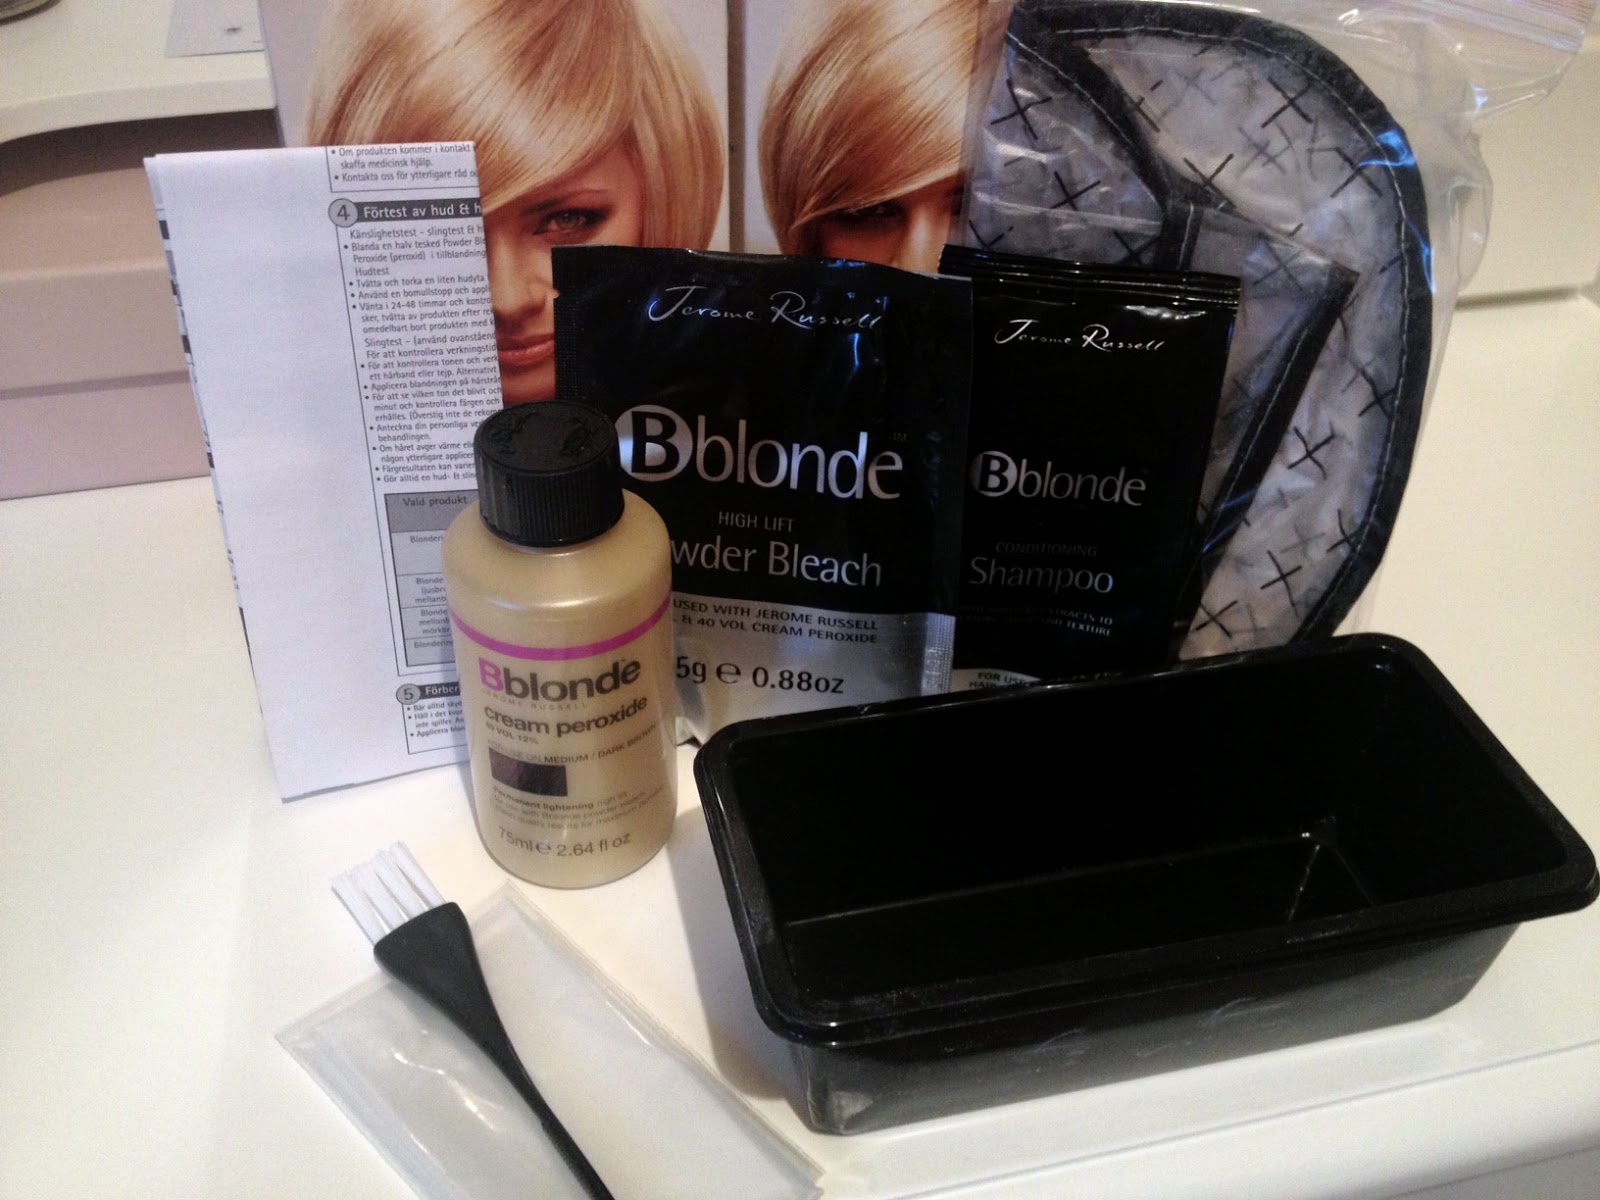 Jerome Russell Bblonde Highlighting Kit - wide 6